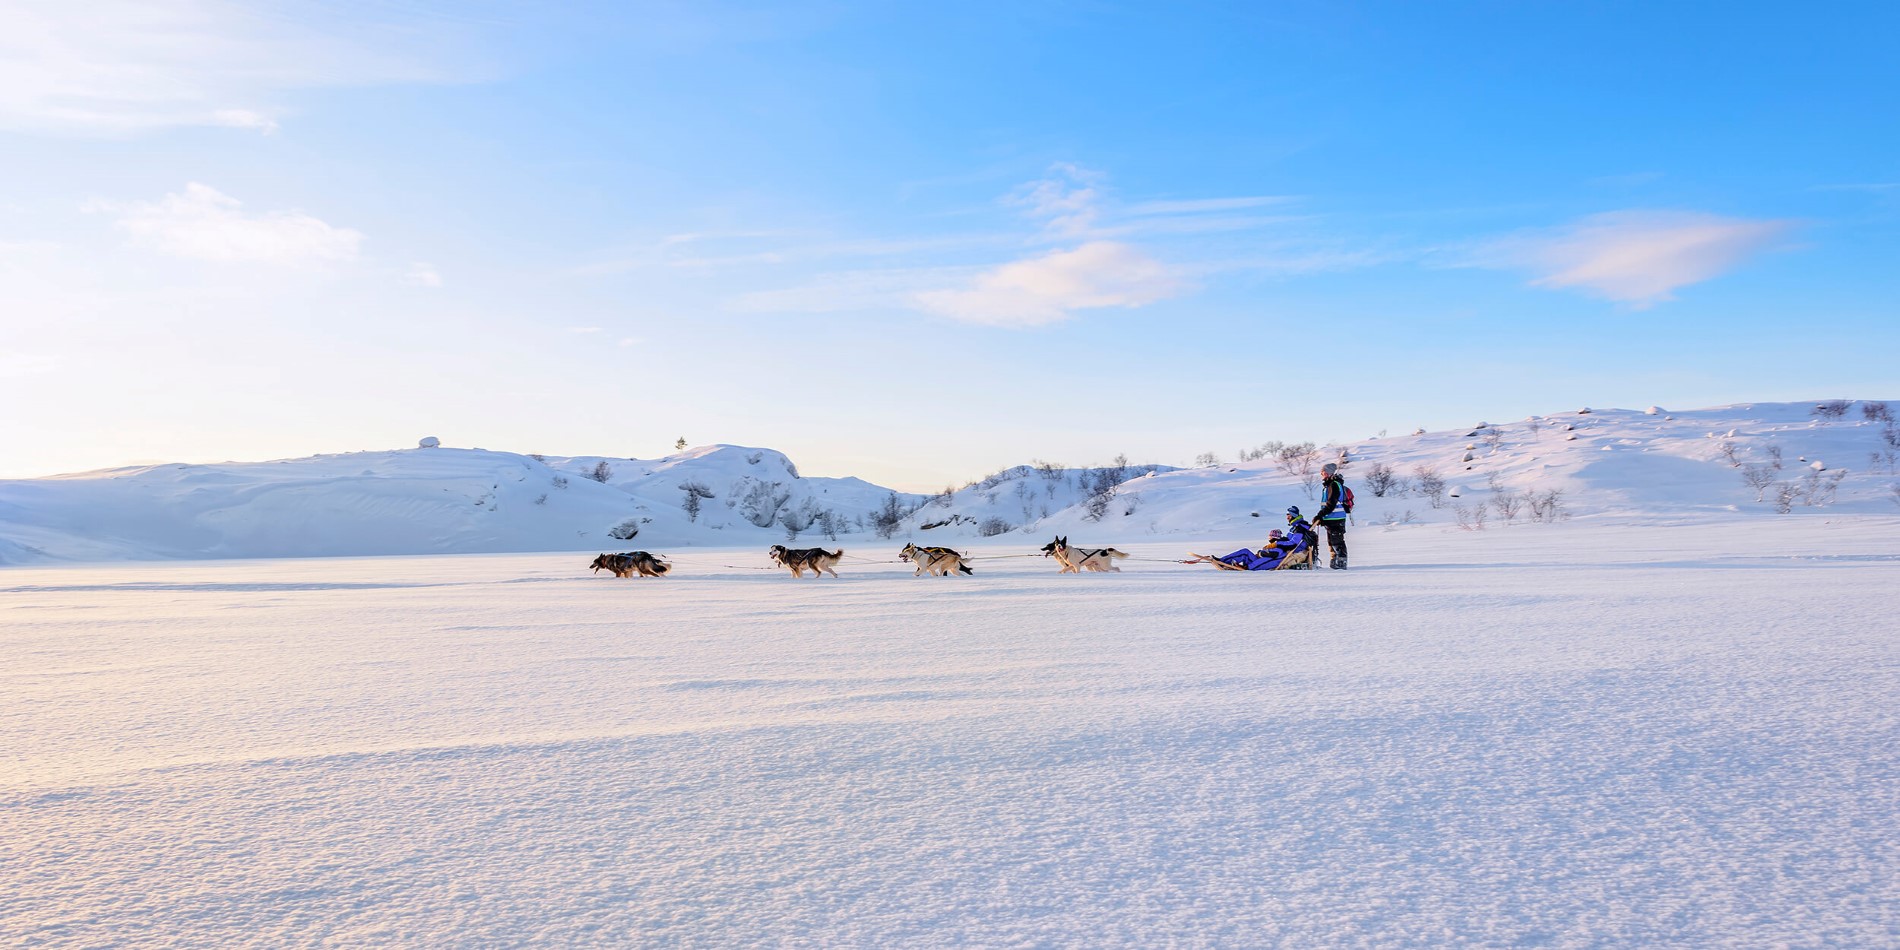 A group of people riding skis on a snowy hill